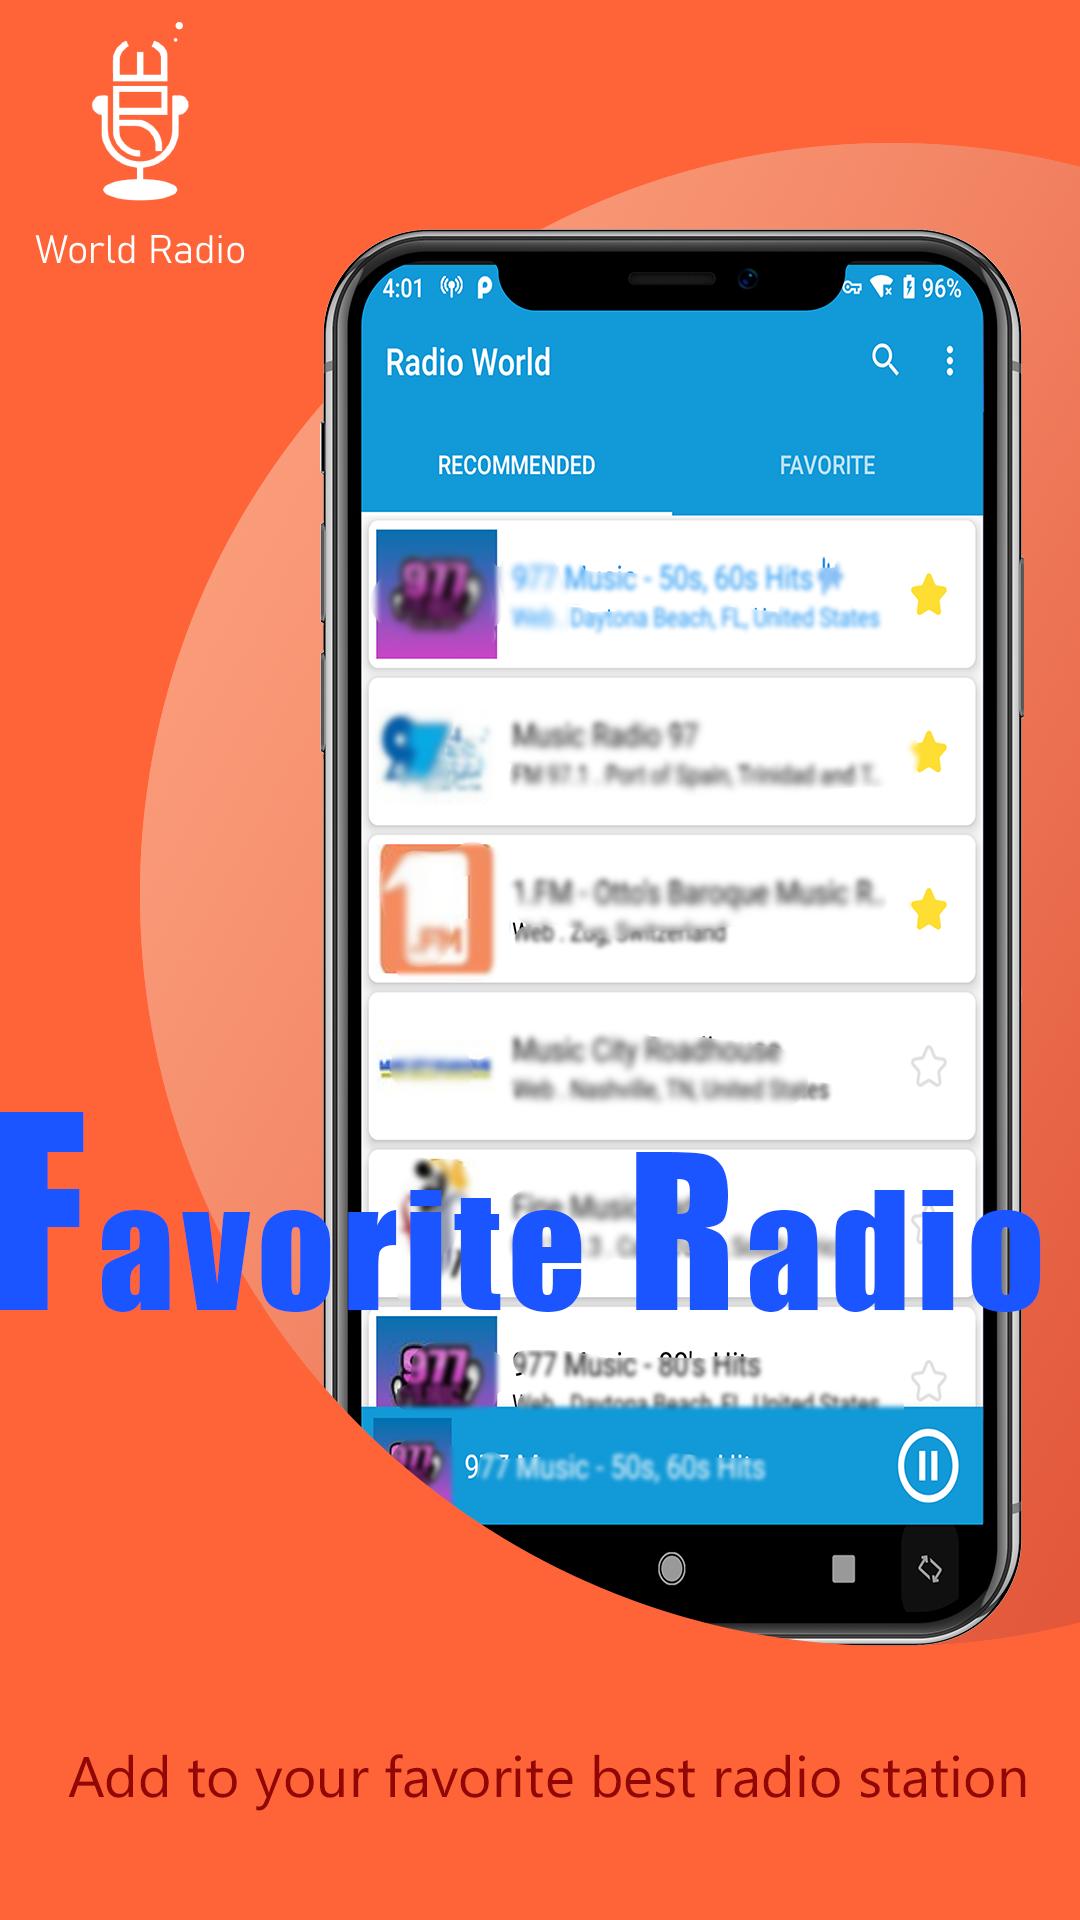 World Radio - Global News Broadcast, FM for Android - APK Download